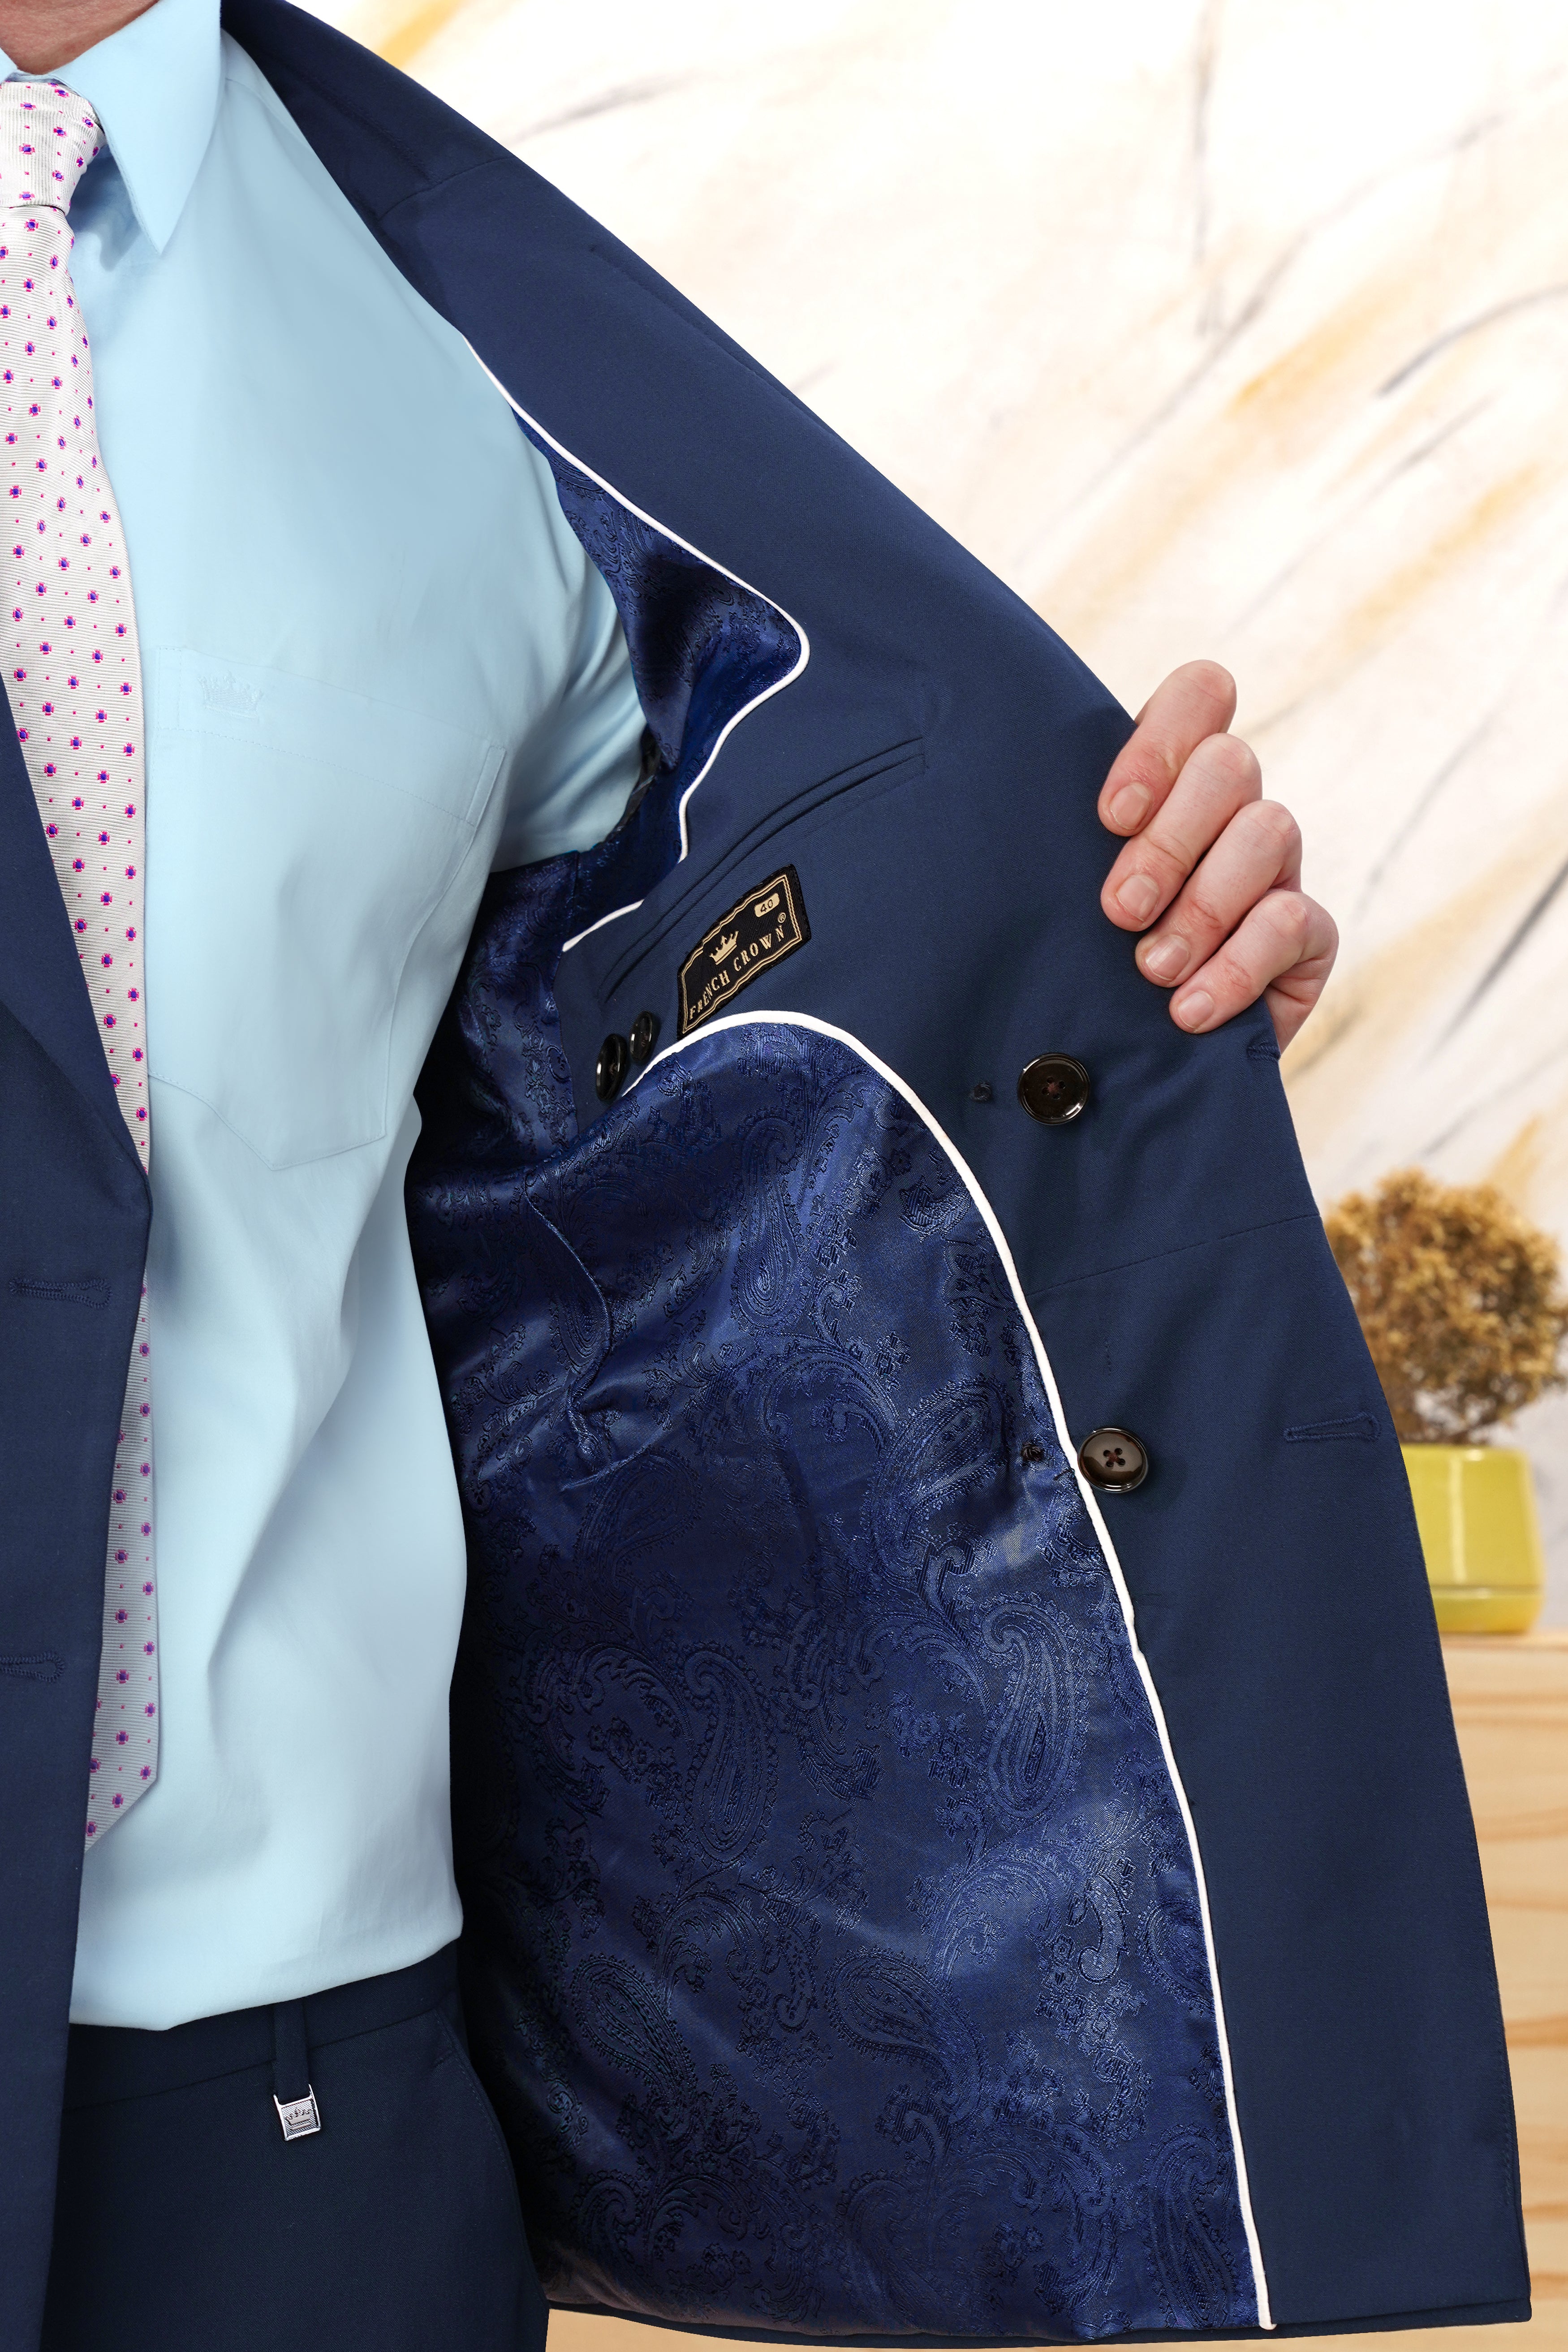 Cloud Burst Blue Wool Rich Double Breasted Stretchable Traveler Blazer BL3078-DB-36, BL3078-DB-38, BL3078-DB-40, BL3078-DB-42, BL3078-DB-44, BL3078-DB-46, BL3078-DB-48, BL3078-DB-50, BL3078-DB-52, BL3078-DB-54, BL3078-DB-56, BL3078-DB-58, BL3078-DB-60